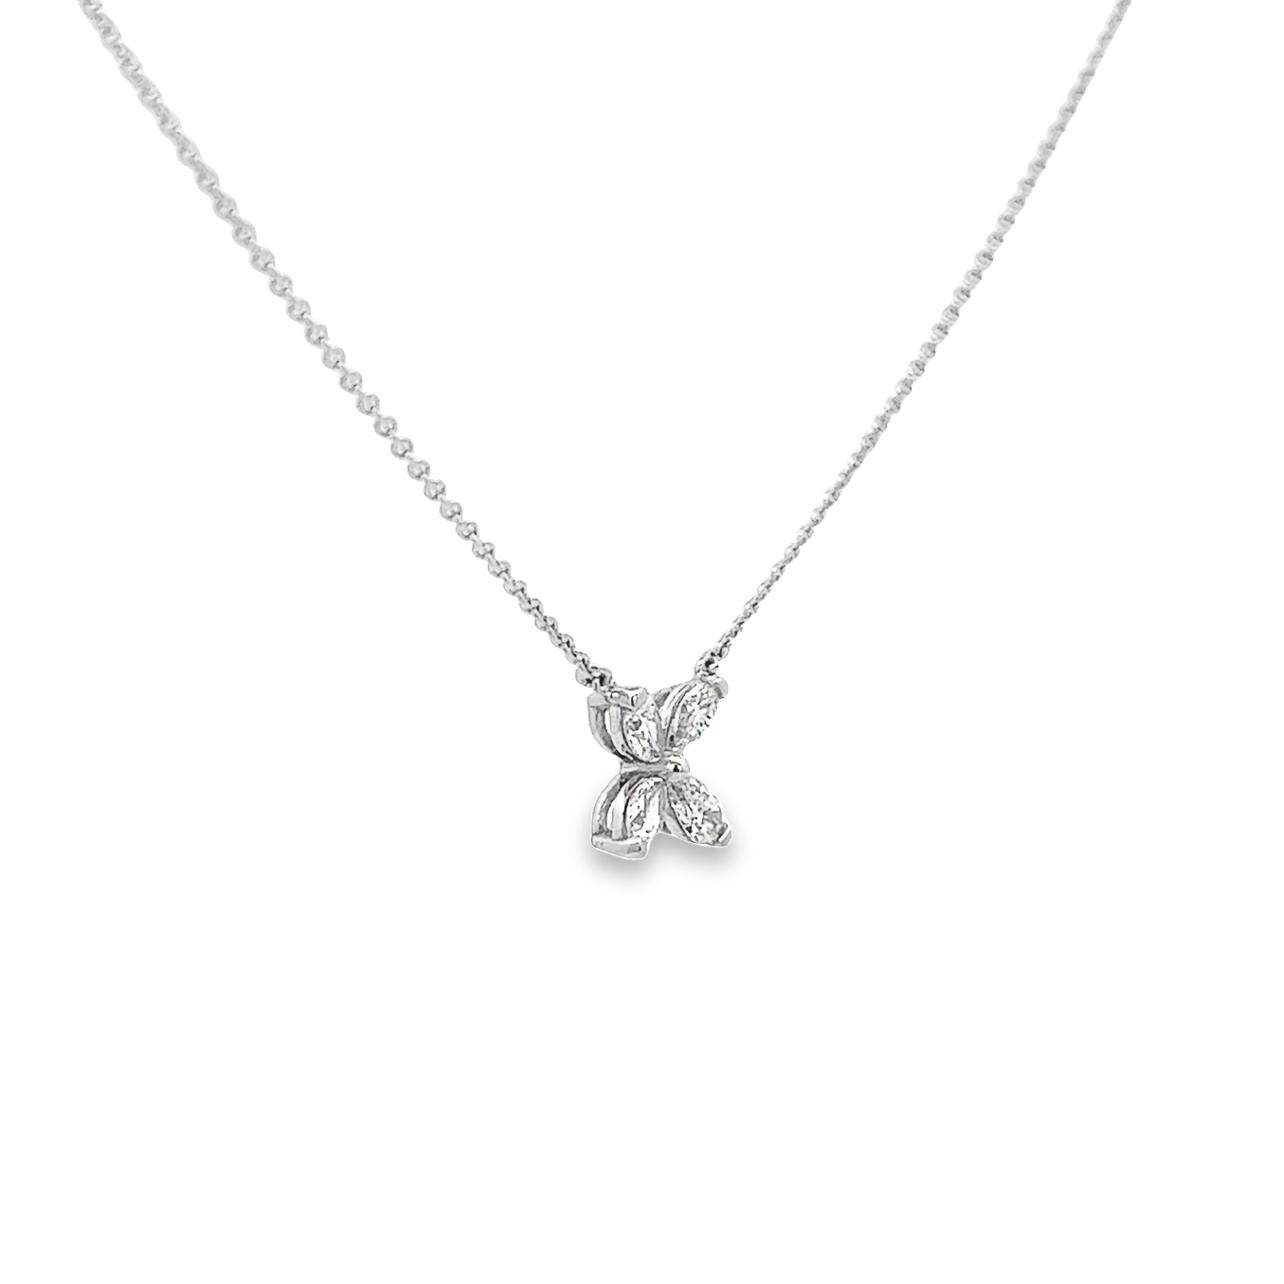 0.65 Carat Flower Shape Diamond Pendant Necklace in 18K White Gold In New Condition For Sale In New York, NY